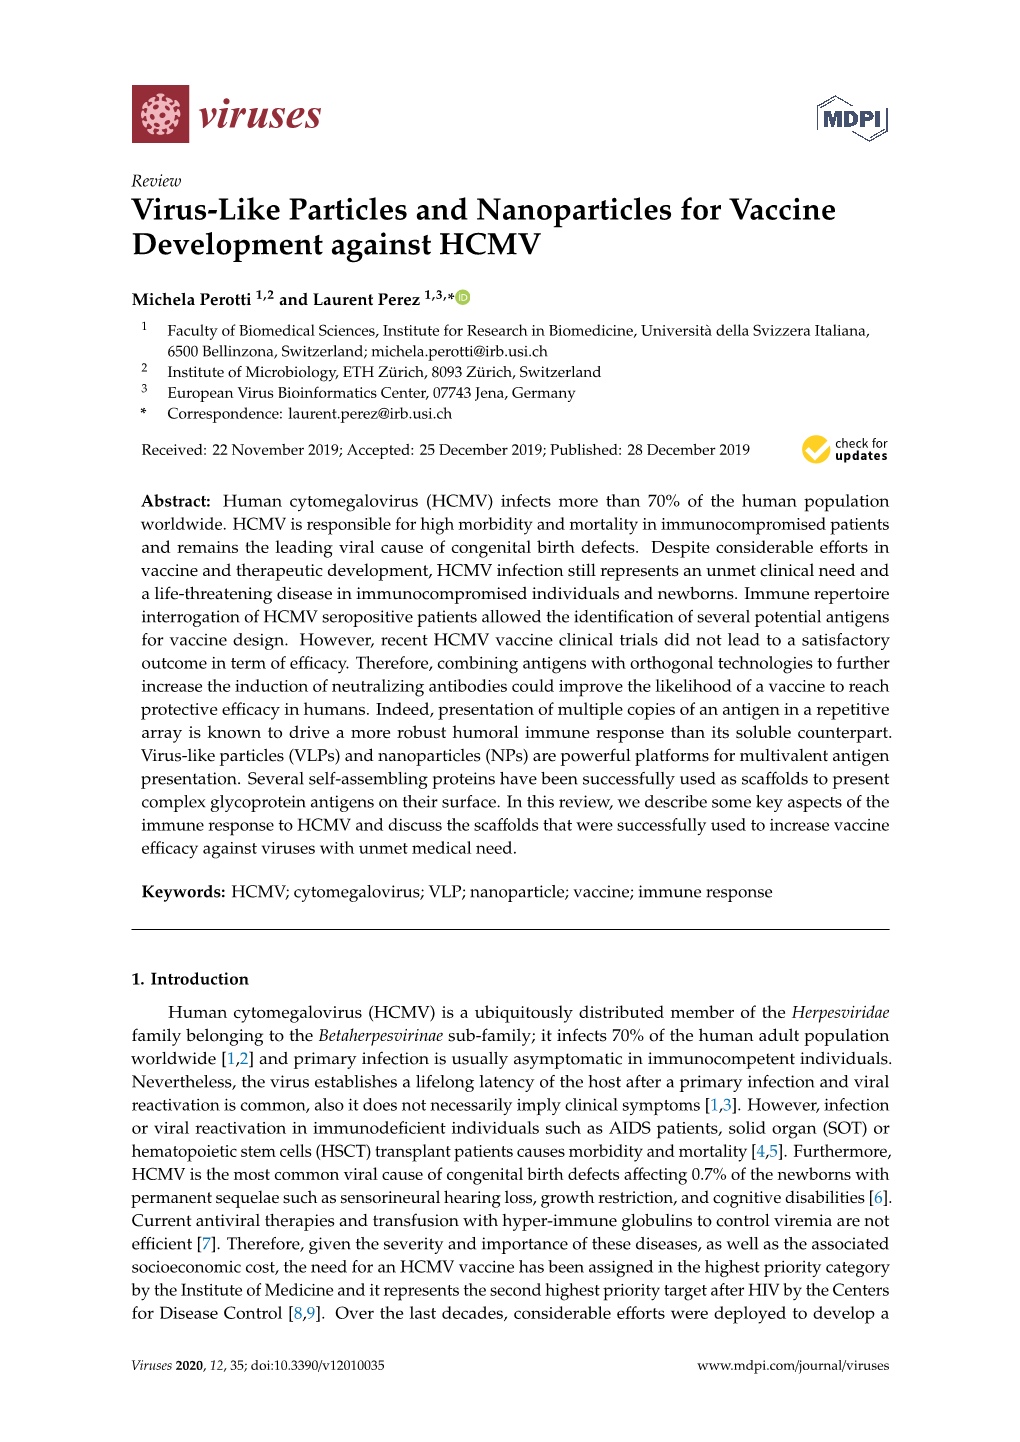 Virus-Like Particles and Nanoparticles for Vaccine Development Against HCMV